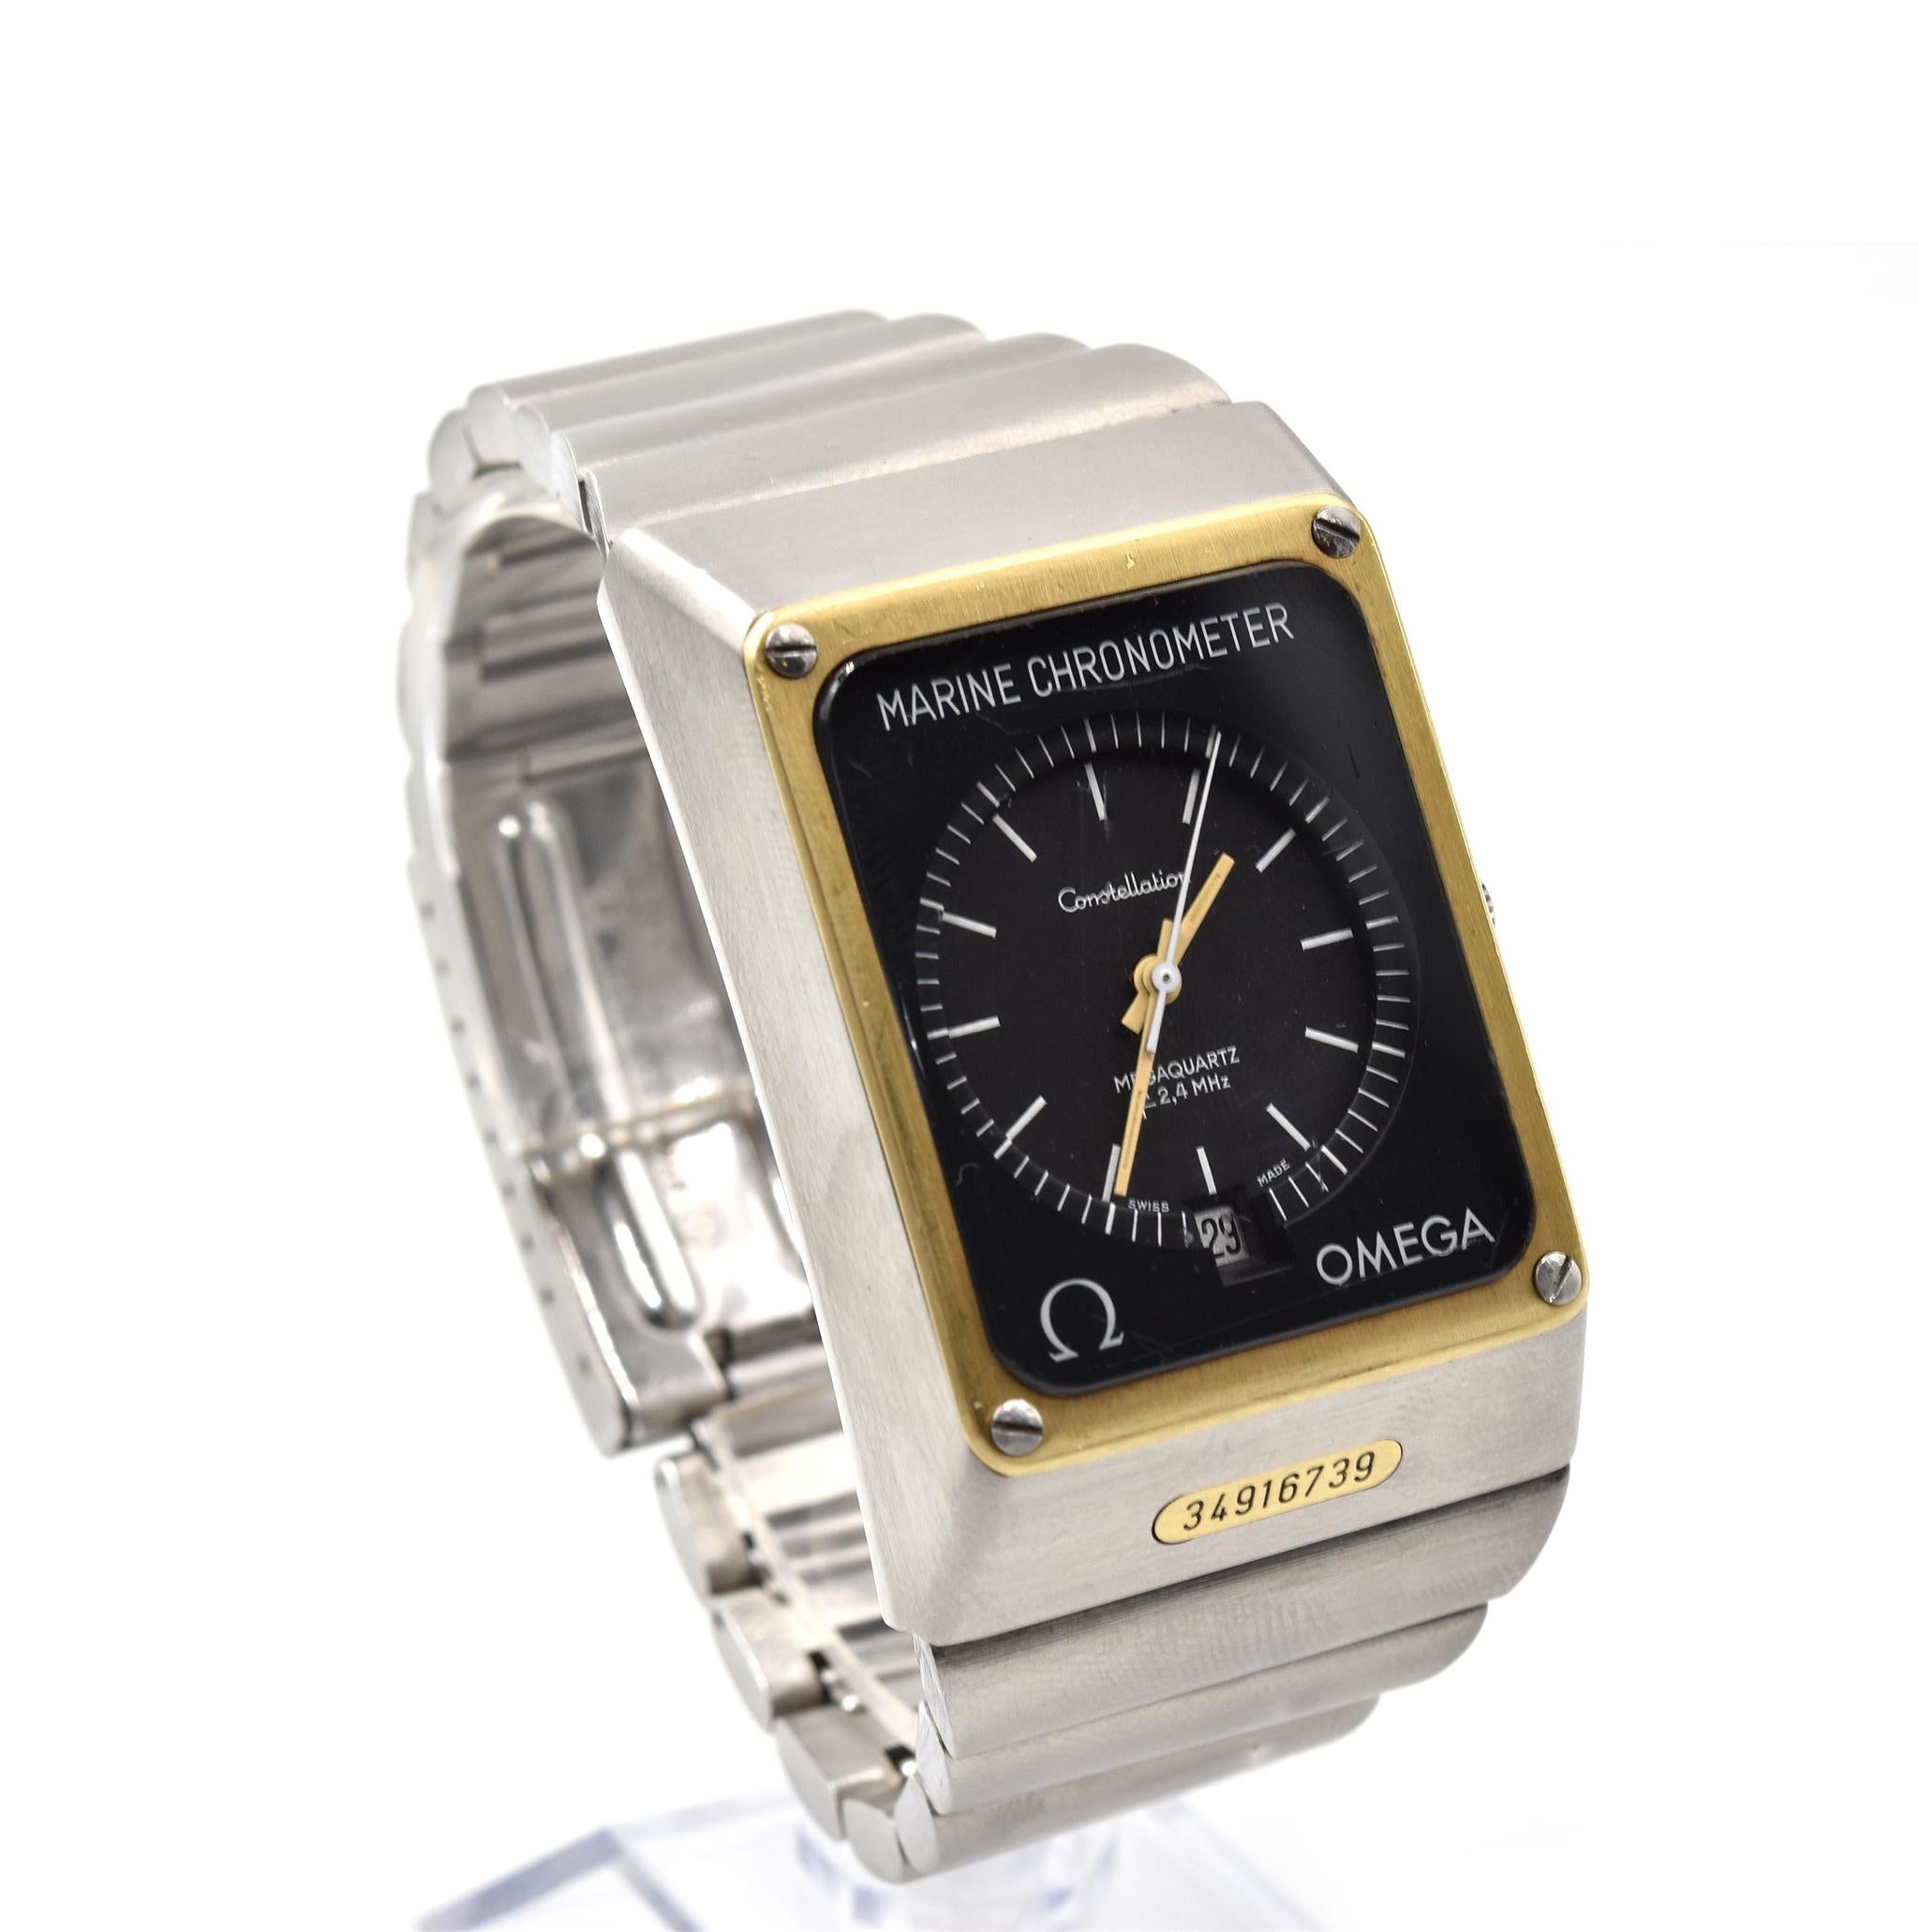 Movement: automatic
Function: hours, minutes, sub-seconds
Case: 44mm x 32mm stainless steel case, 18k yellow gold bezel, mineral glass, steel pull/push crown, water resistant to 100 meters
Band: stainless steel bracelet with folding clasp
Dial: